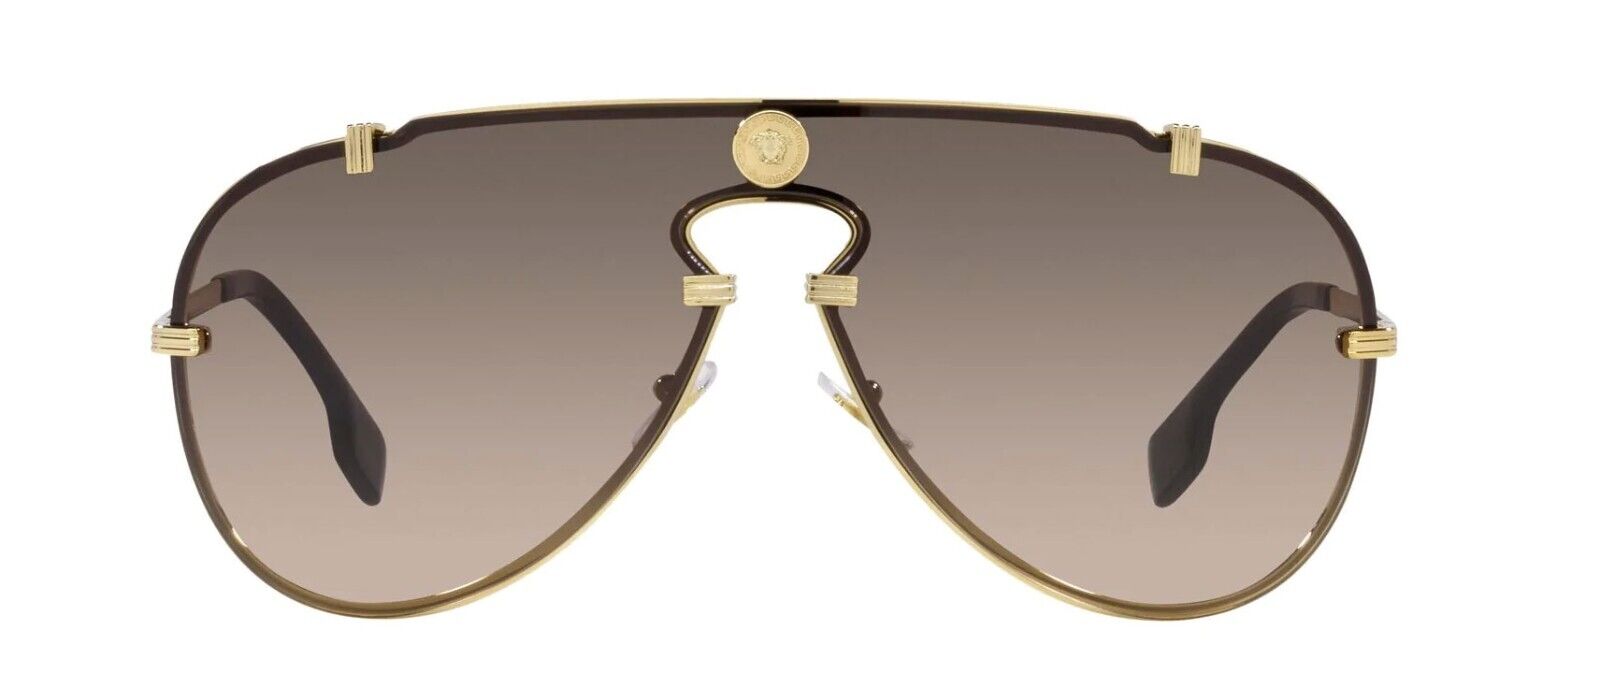 Versace Sunglasses VE 2243 1002/13 43-xx-140 Gold / Brown Gradient Made in Italy-classypw.com-2